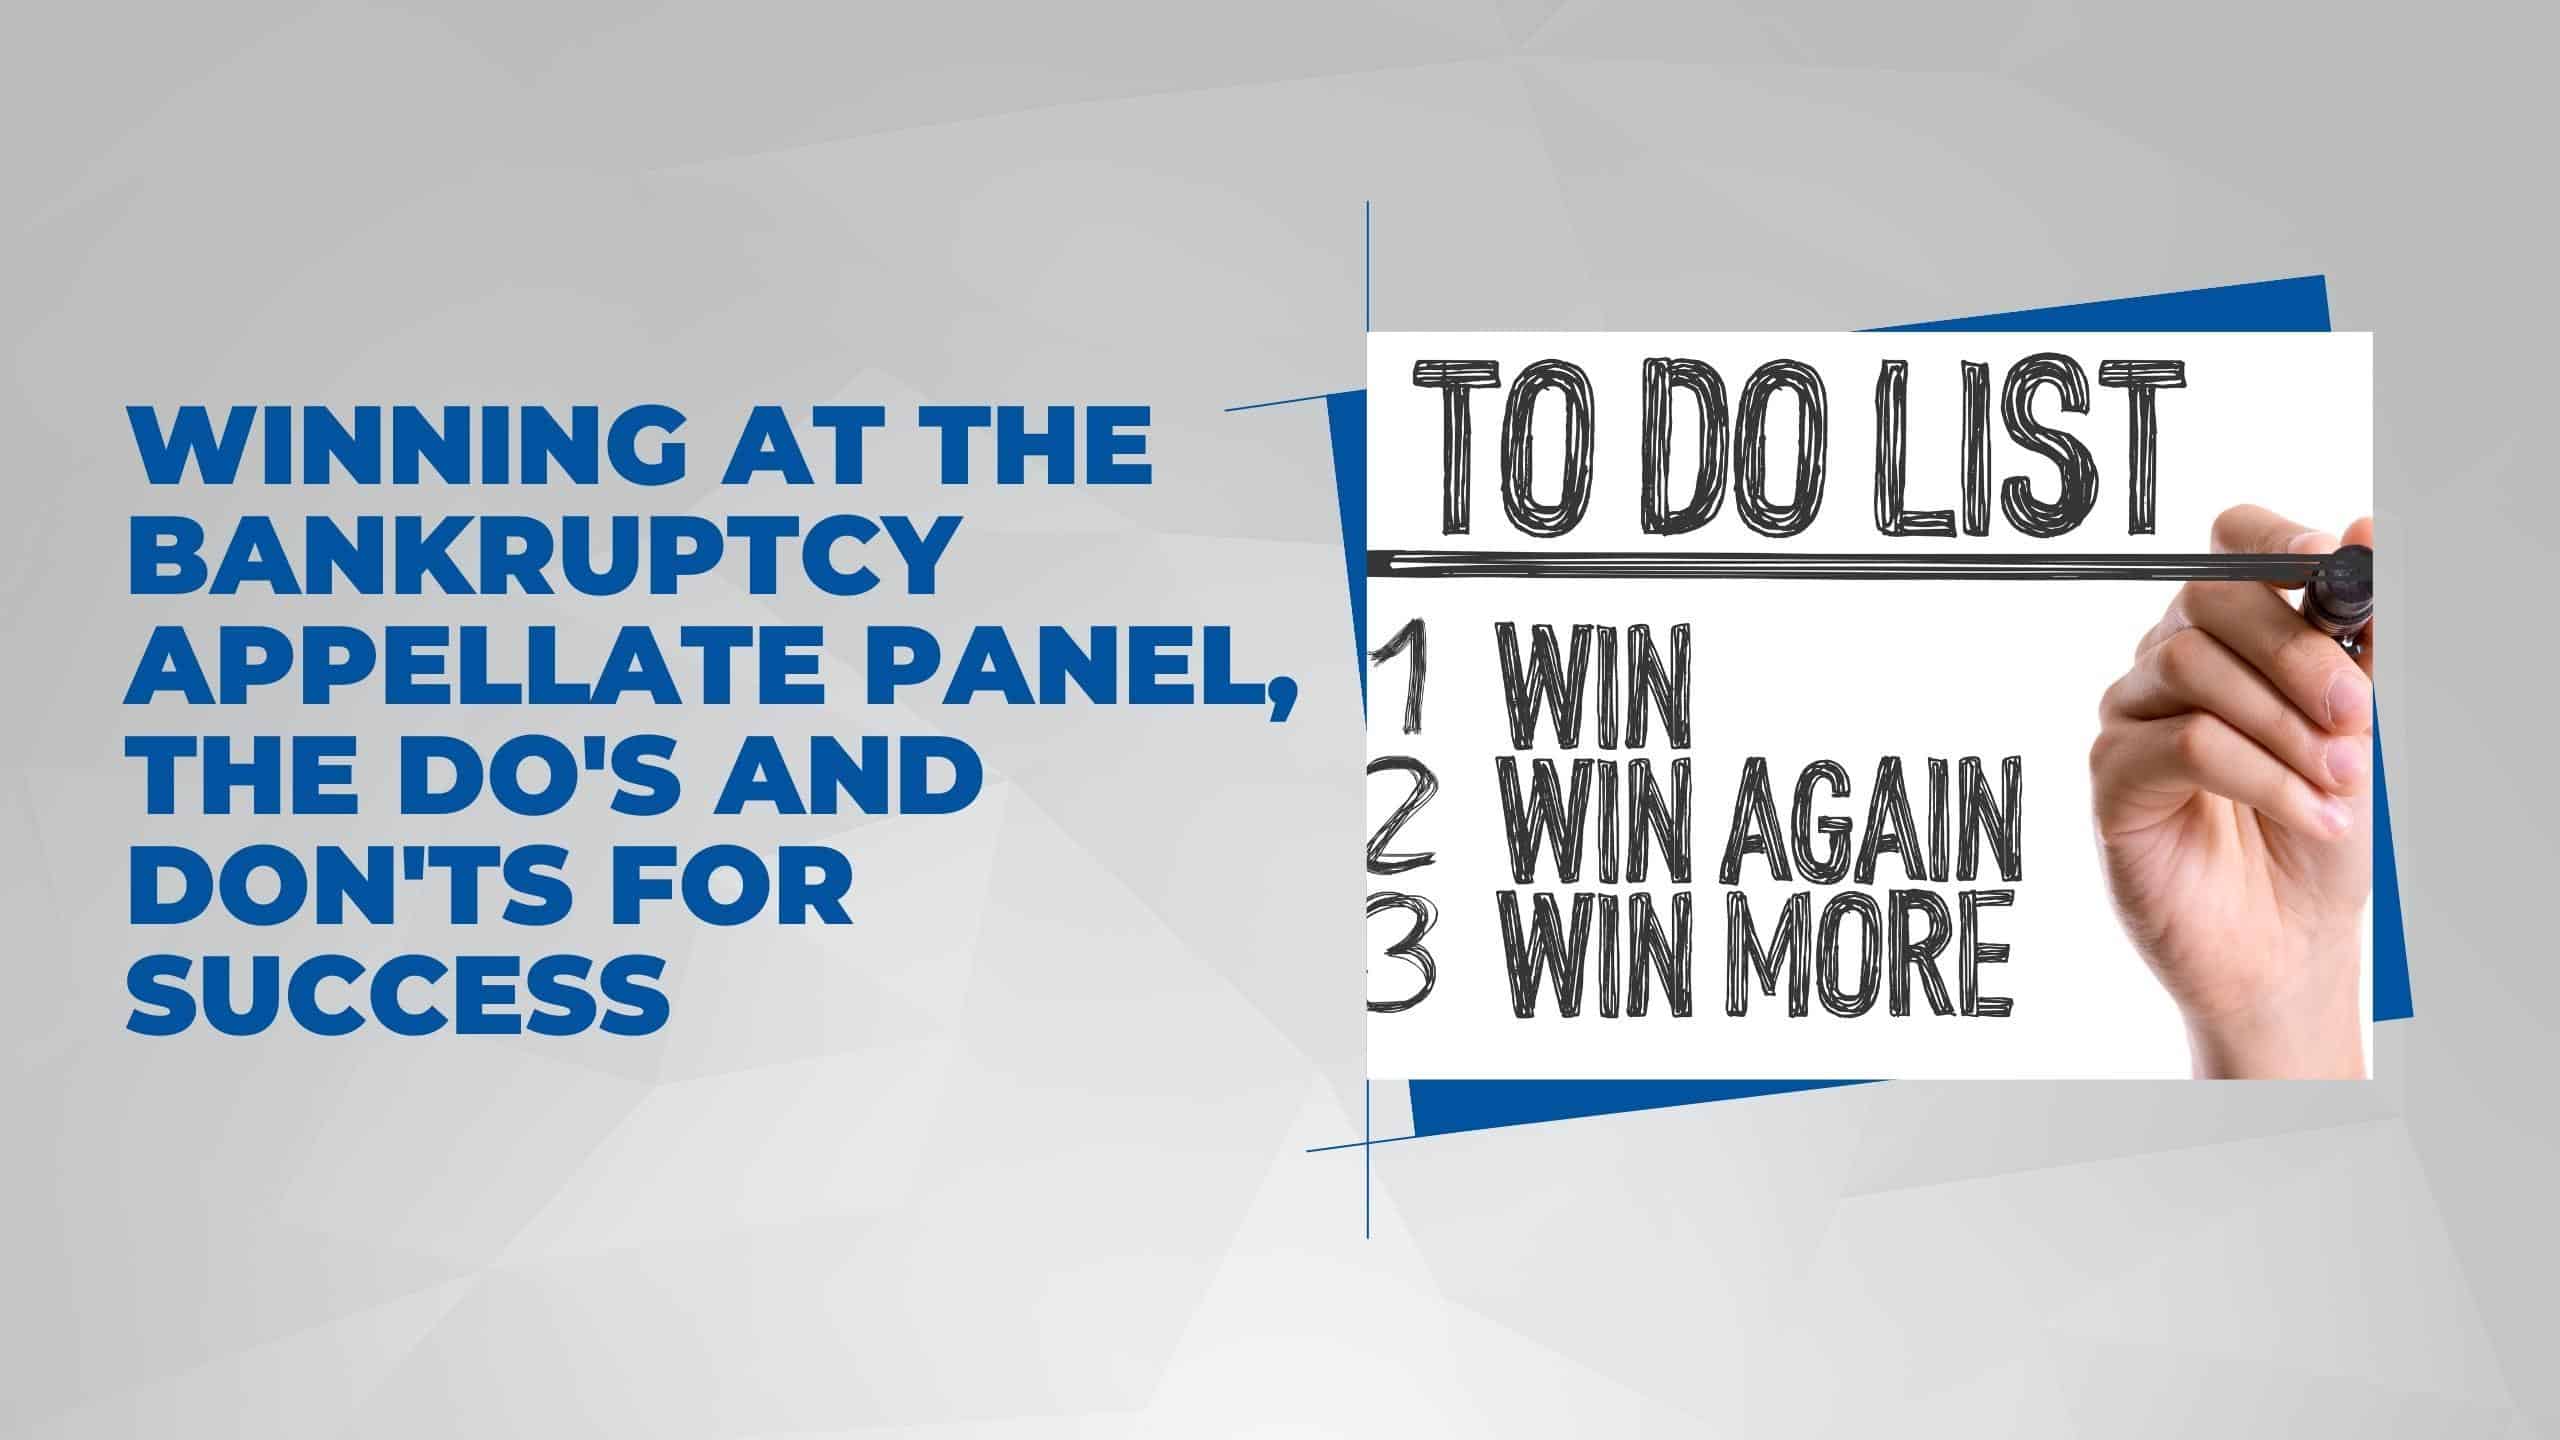 Winning at the Bankruptcy Appellate Panel, the Do’s and Don’ts for Success